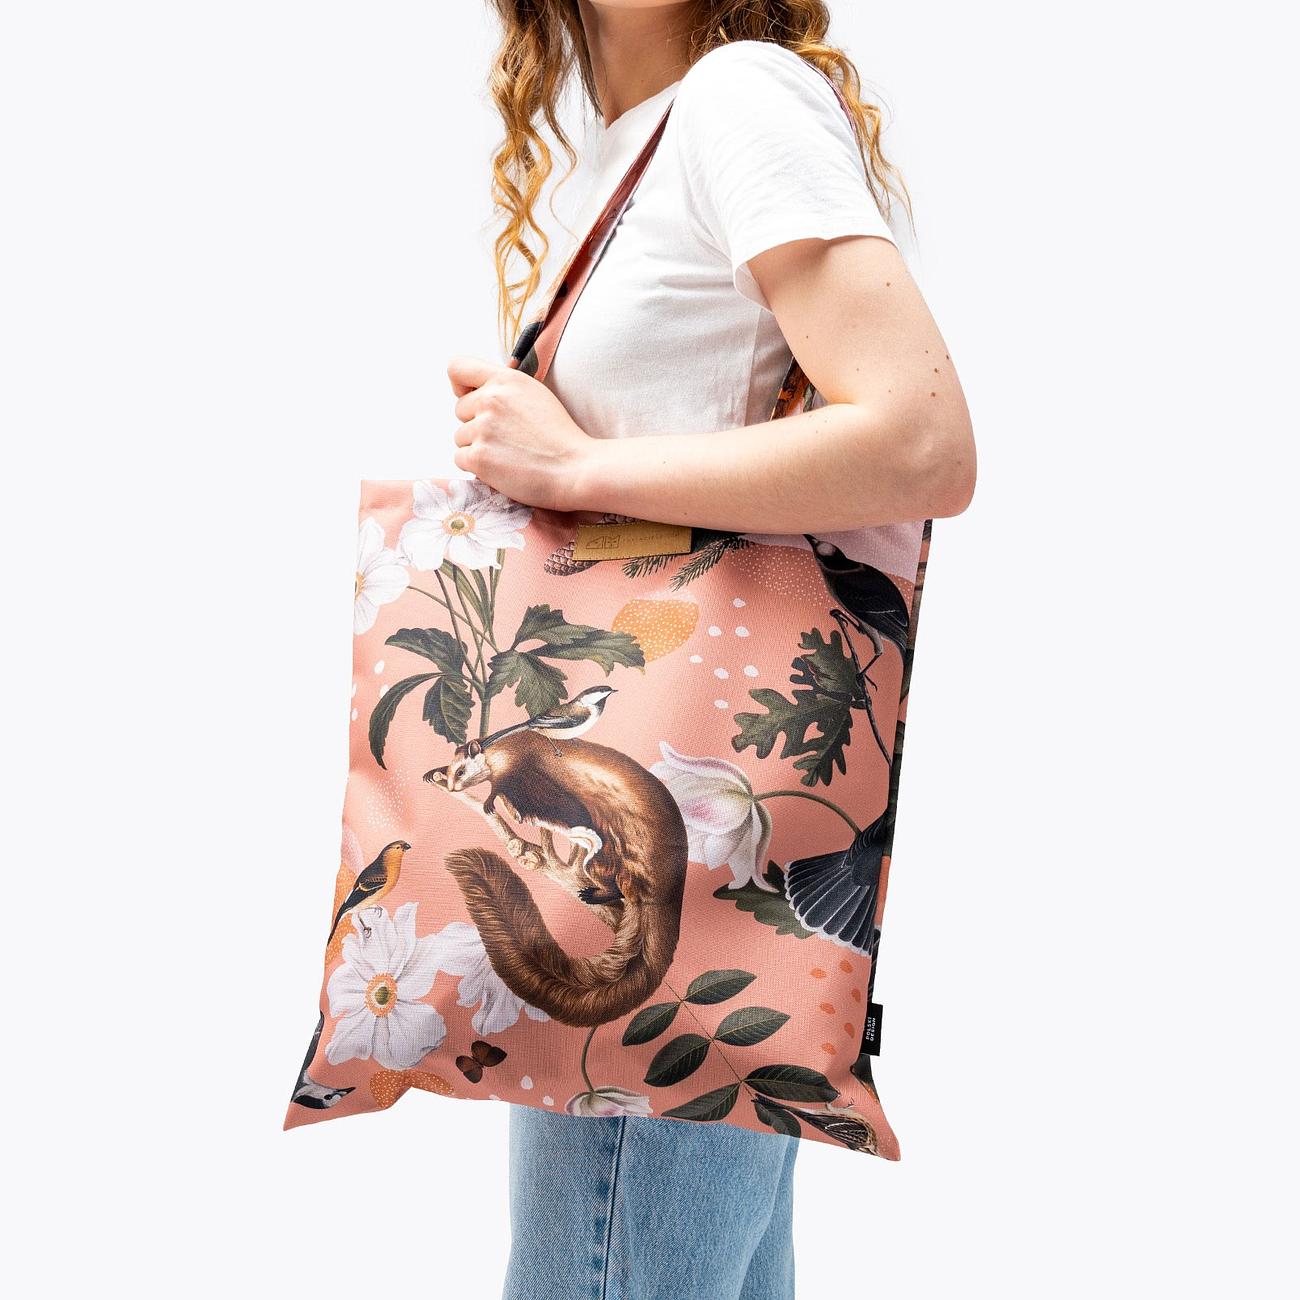 Reusable bag "Play with my nuts"